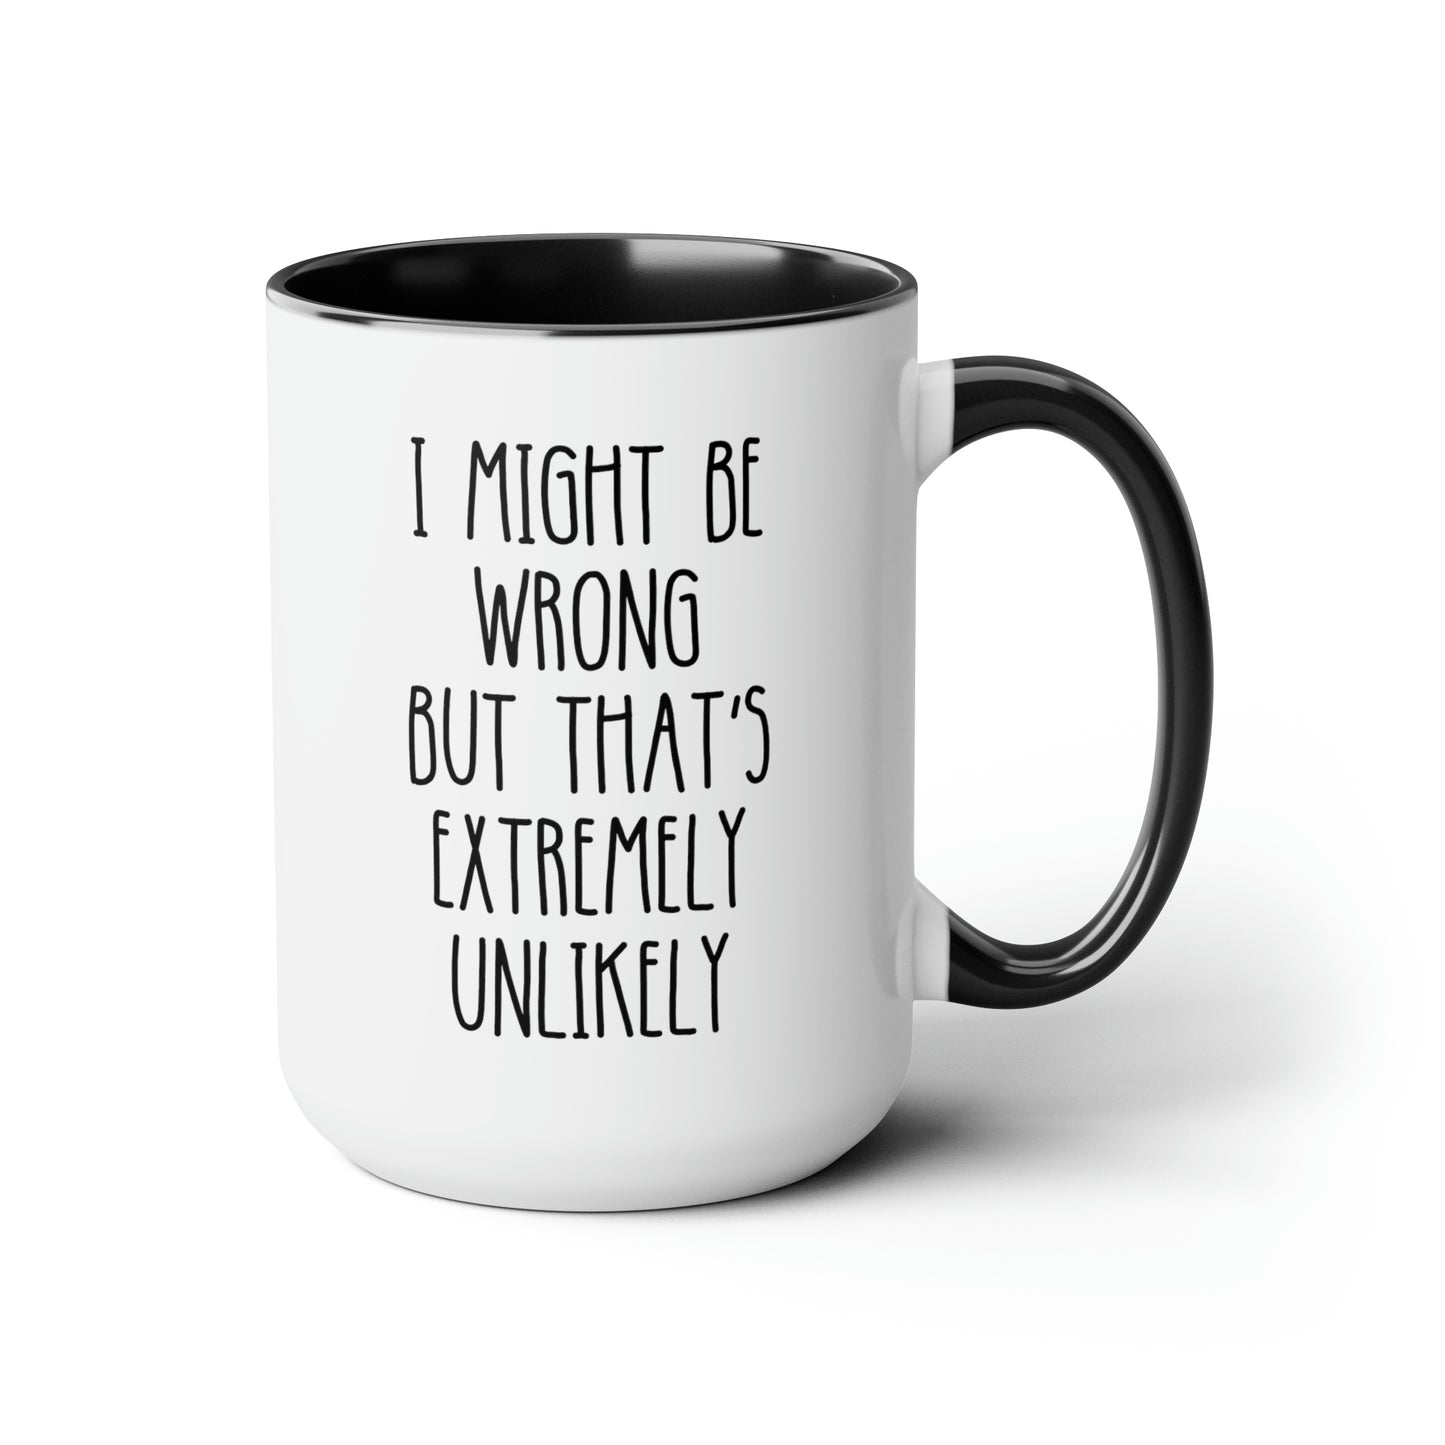 I Might Be Wrong But That's Extremely Unlikely 15oz white with black accent funny large coffee mug gift for­ coworker work saying sarcastic waveywares wavey wares wavywares wavy wares